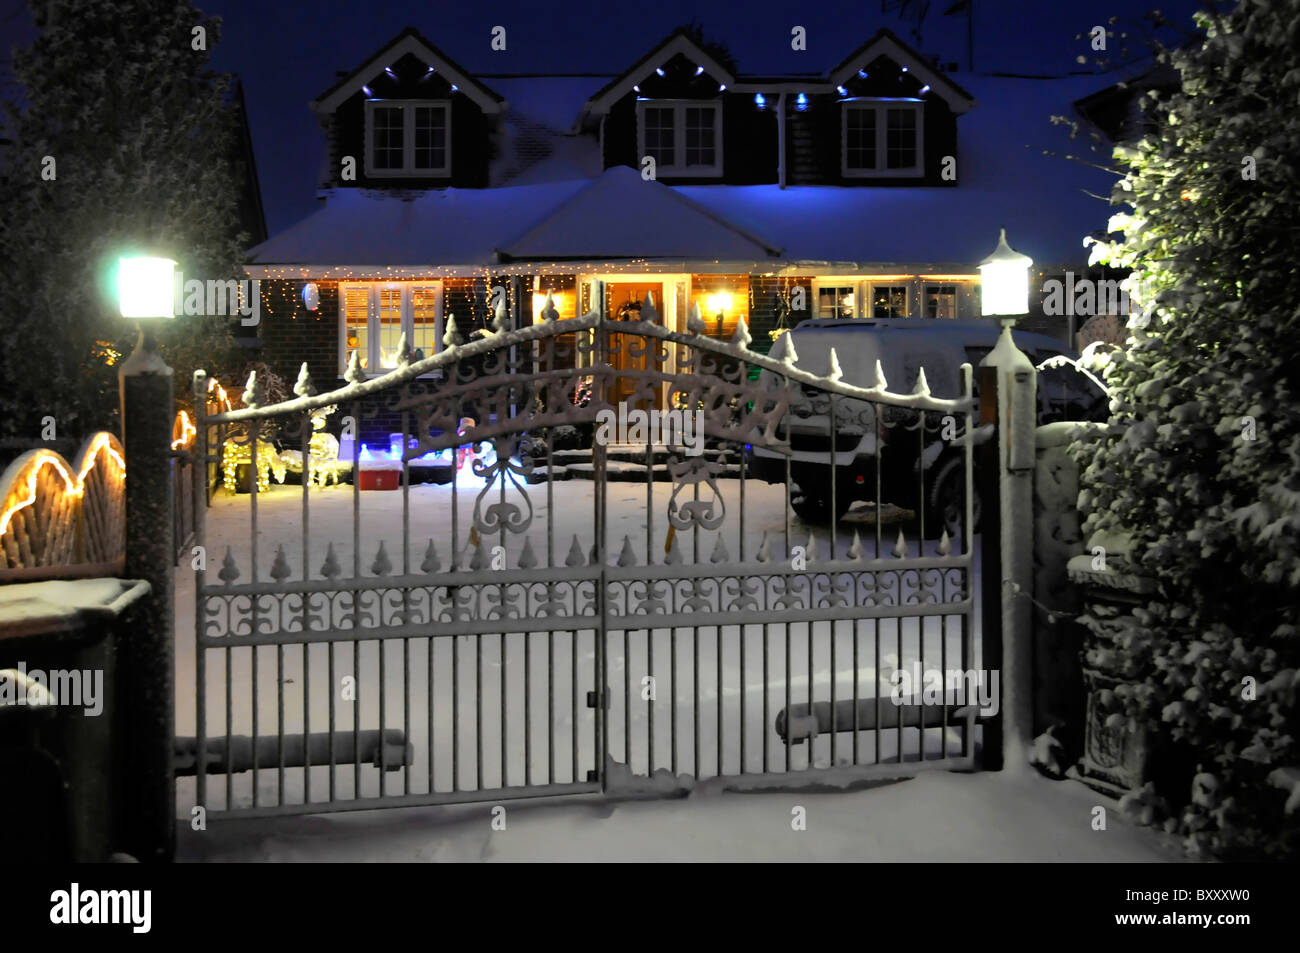 Winter weather snow covering front garden of electric gated house with lights & white Christmas decorations snowfall on roof Essex England UK Stock Photo